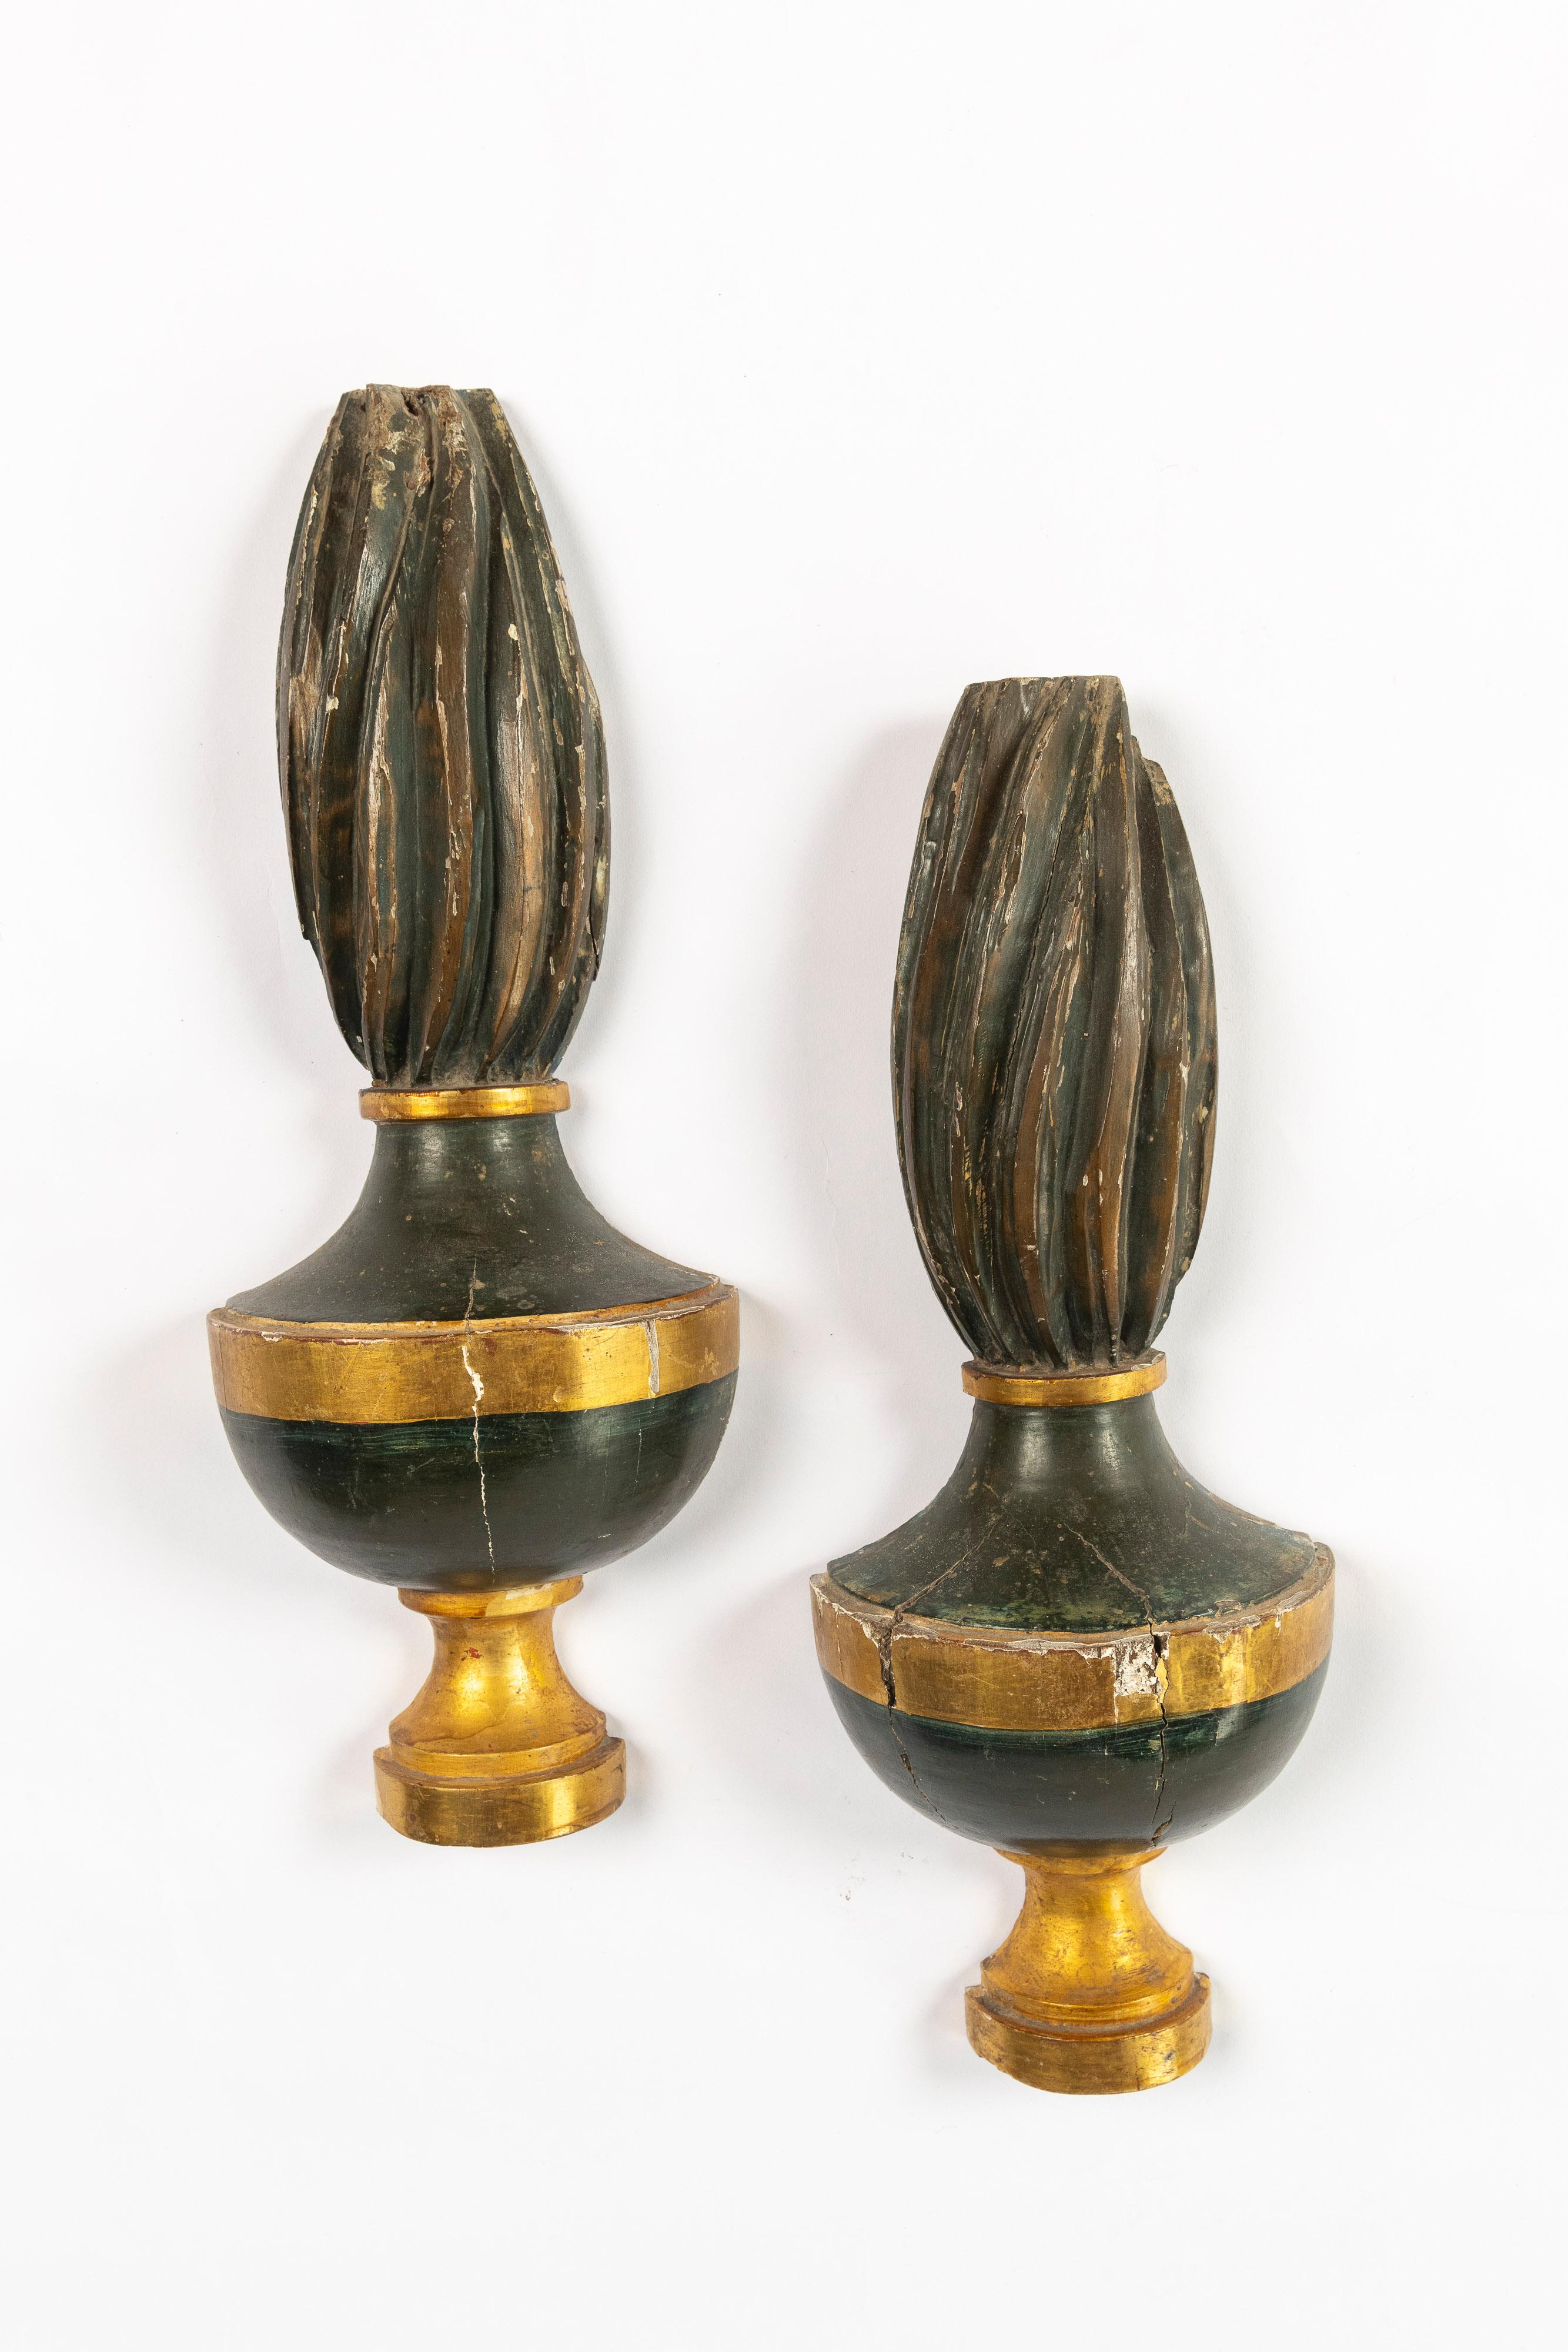 Pair of Vintage Wall Ornaments made of carved and gilded wood. Interesting accessories for a vintage home, especially in the hall or near a mantel.